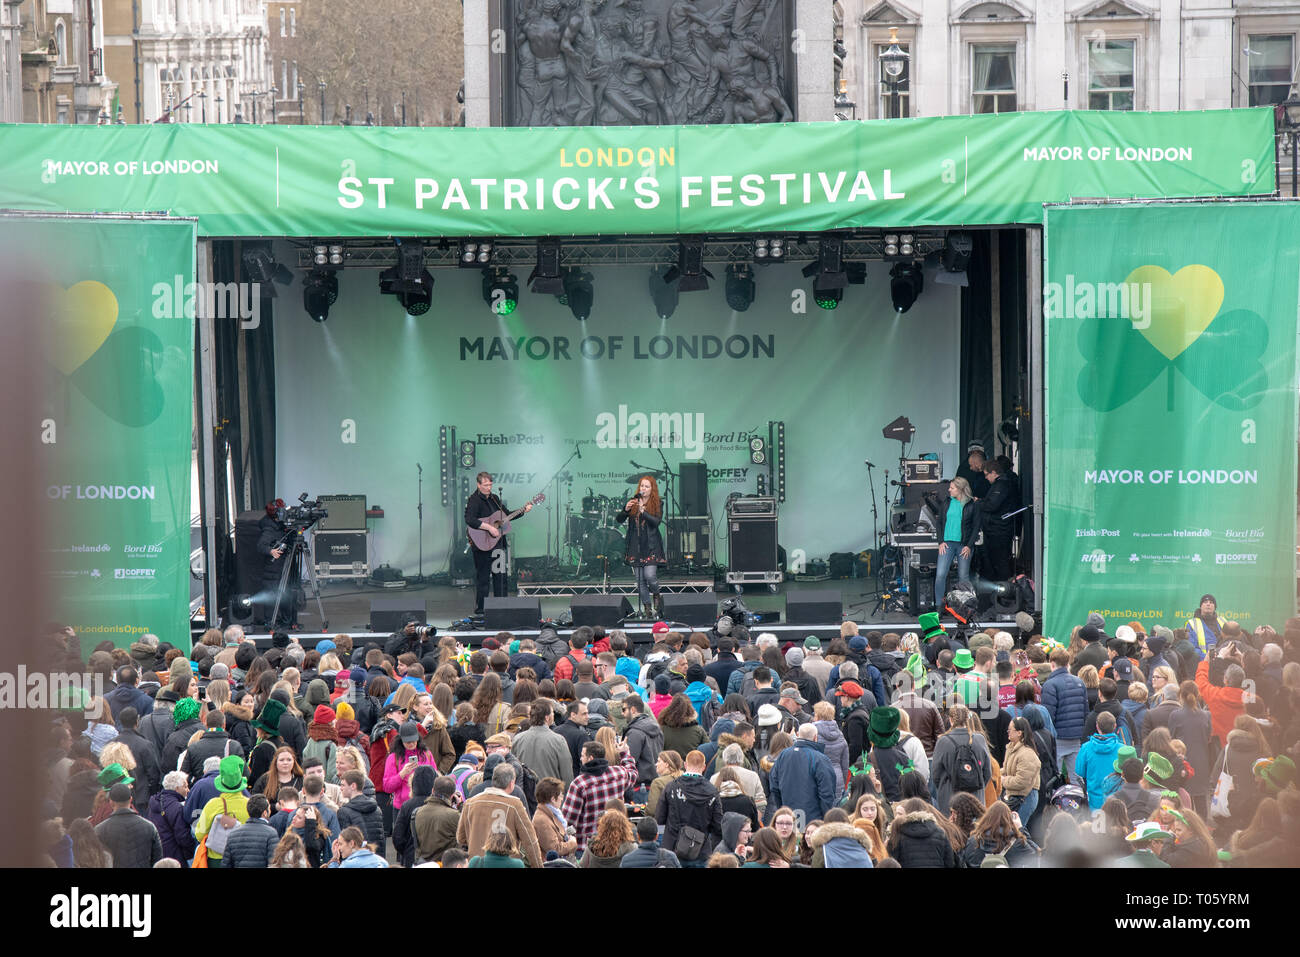 London, UK, 17 March 2019  The London St Patrick's Day Festival, now in its 17th year, attracts more than 125,000 people to events across London and to the parade and festival in central London and Trafalgar Square. This year’s theme is #LondonIsOpen.   Credit: Ilyas Ayub/ Alamy Live News Stock Photo